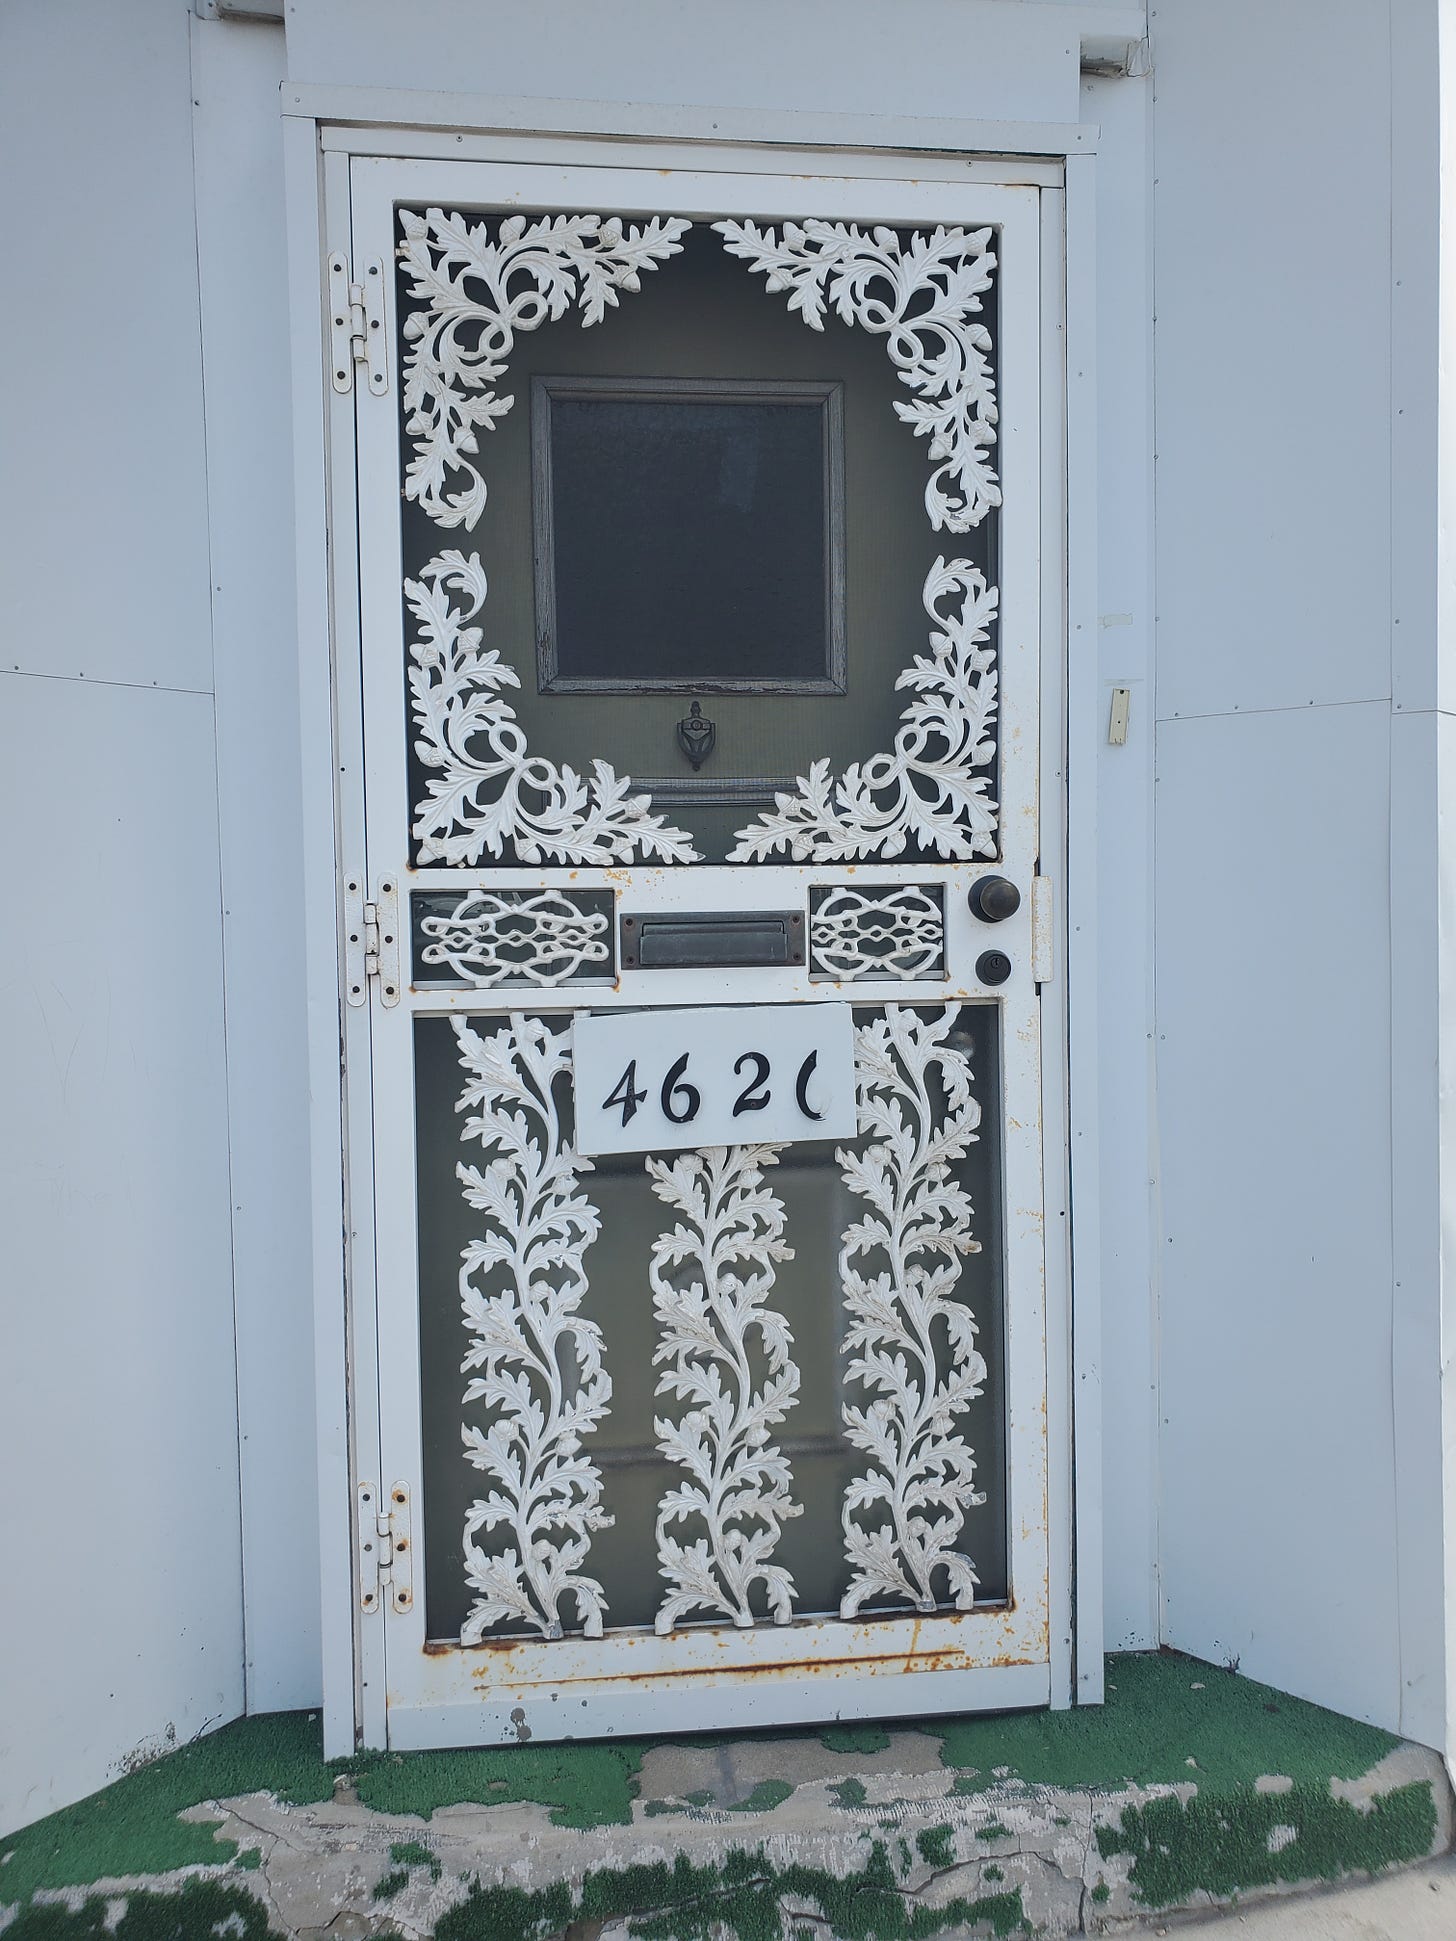 A white door with ornate ironwork reminiscent of feathers or leaves. The number 4621 is on the front of the door.